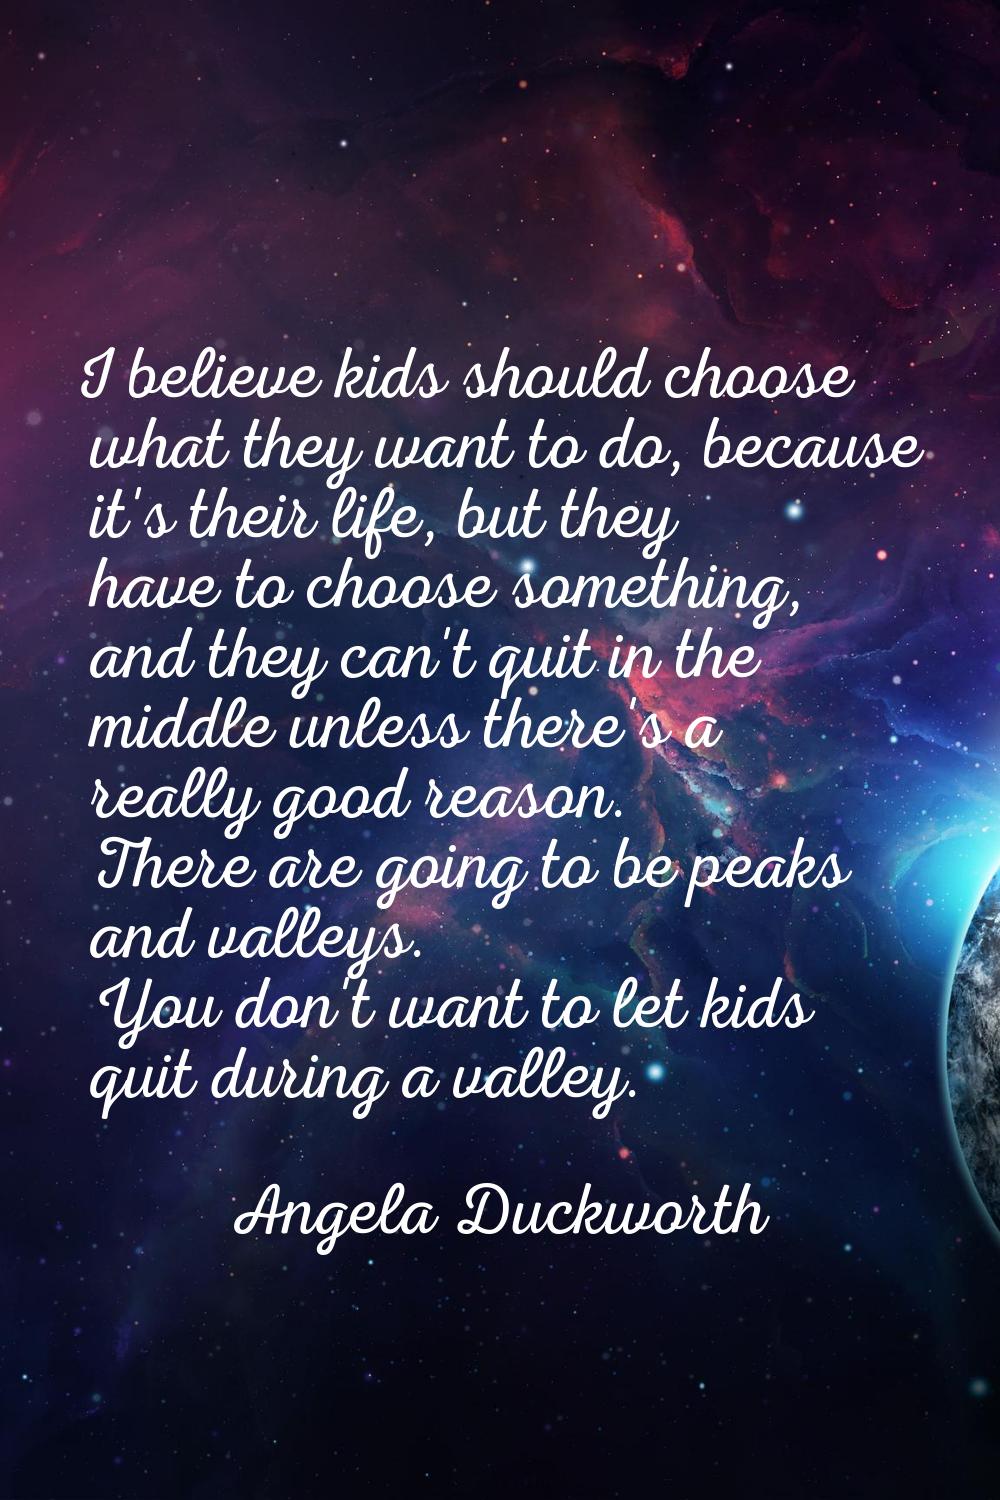 I believe kids should choose what they want to do, because it's their life, but they have to choose